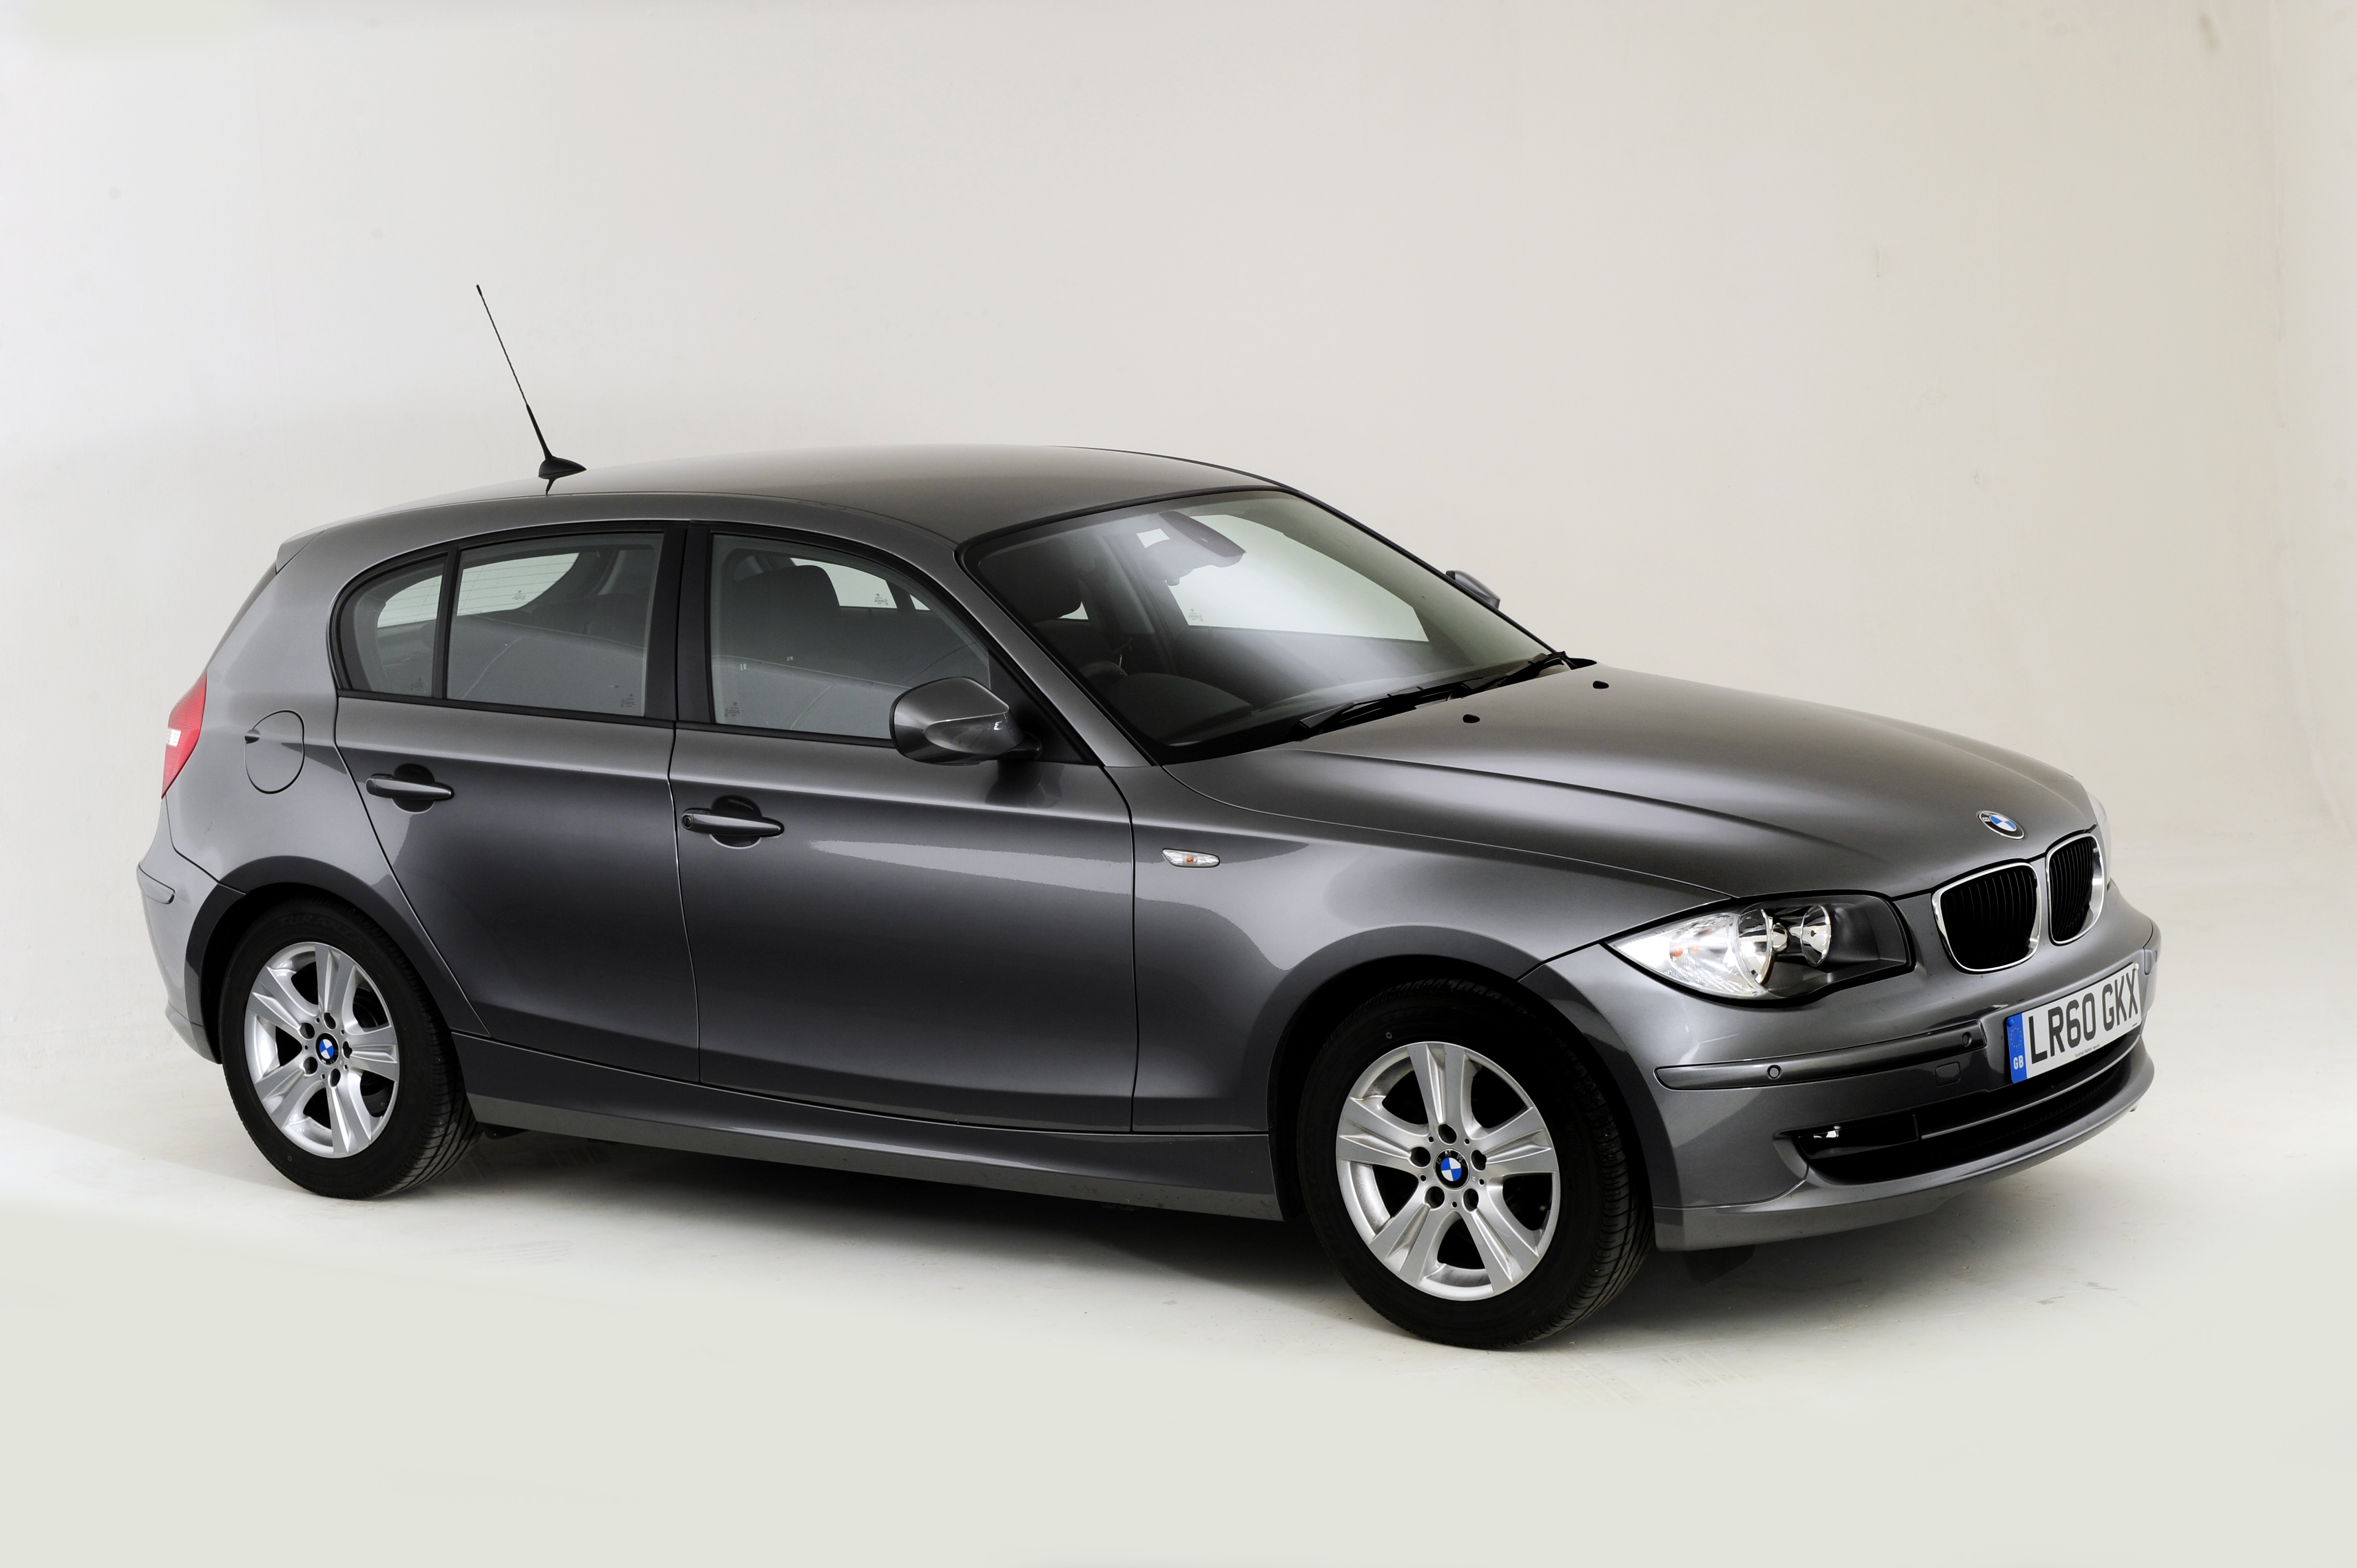 Used Bmw 1 Series Buying Guide 04 11 Mk1 Carbuyer